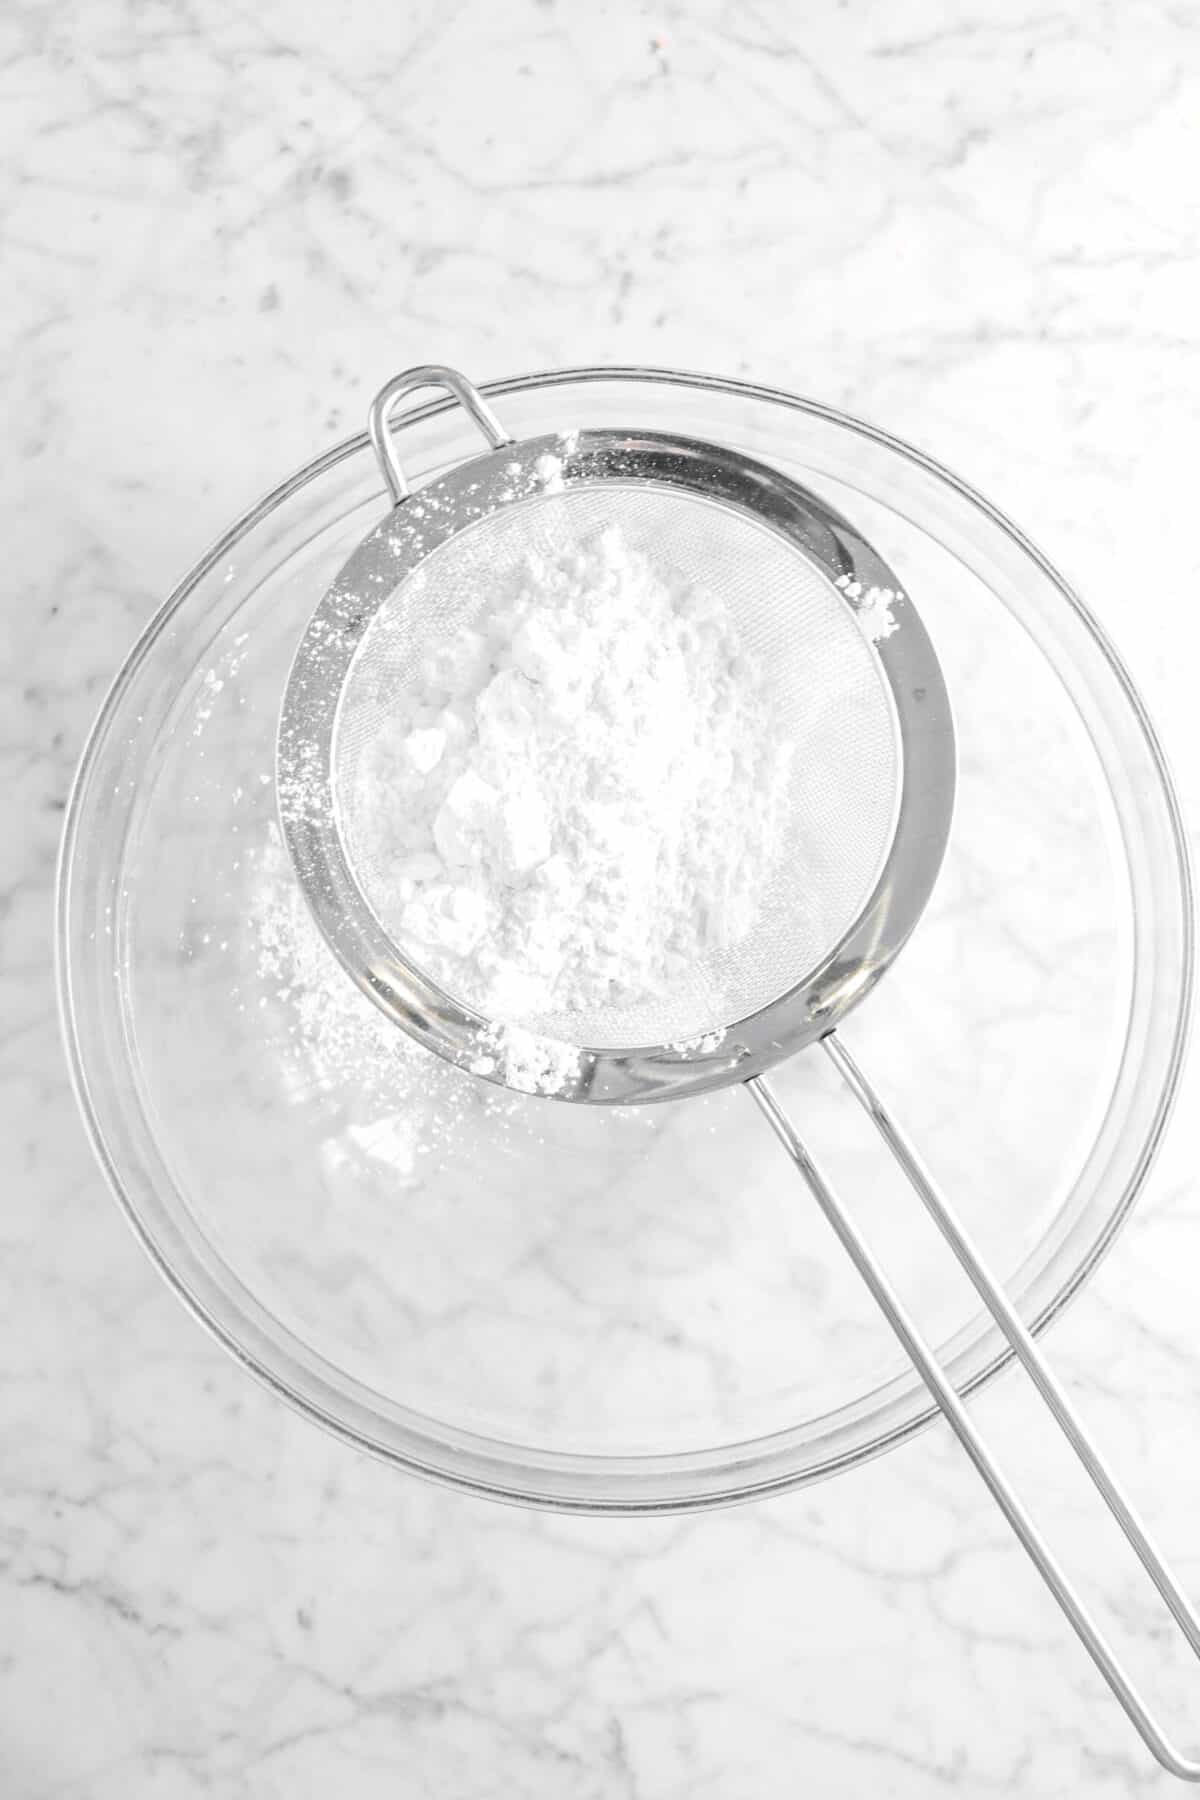 powdered sugar being sifted into glass bowl